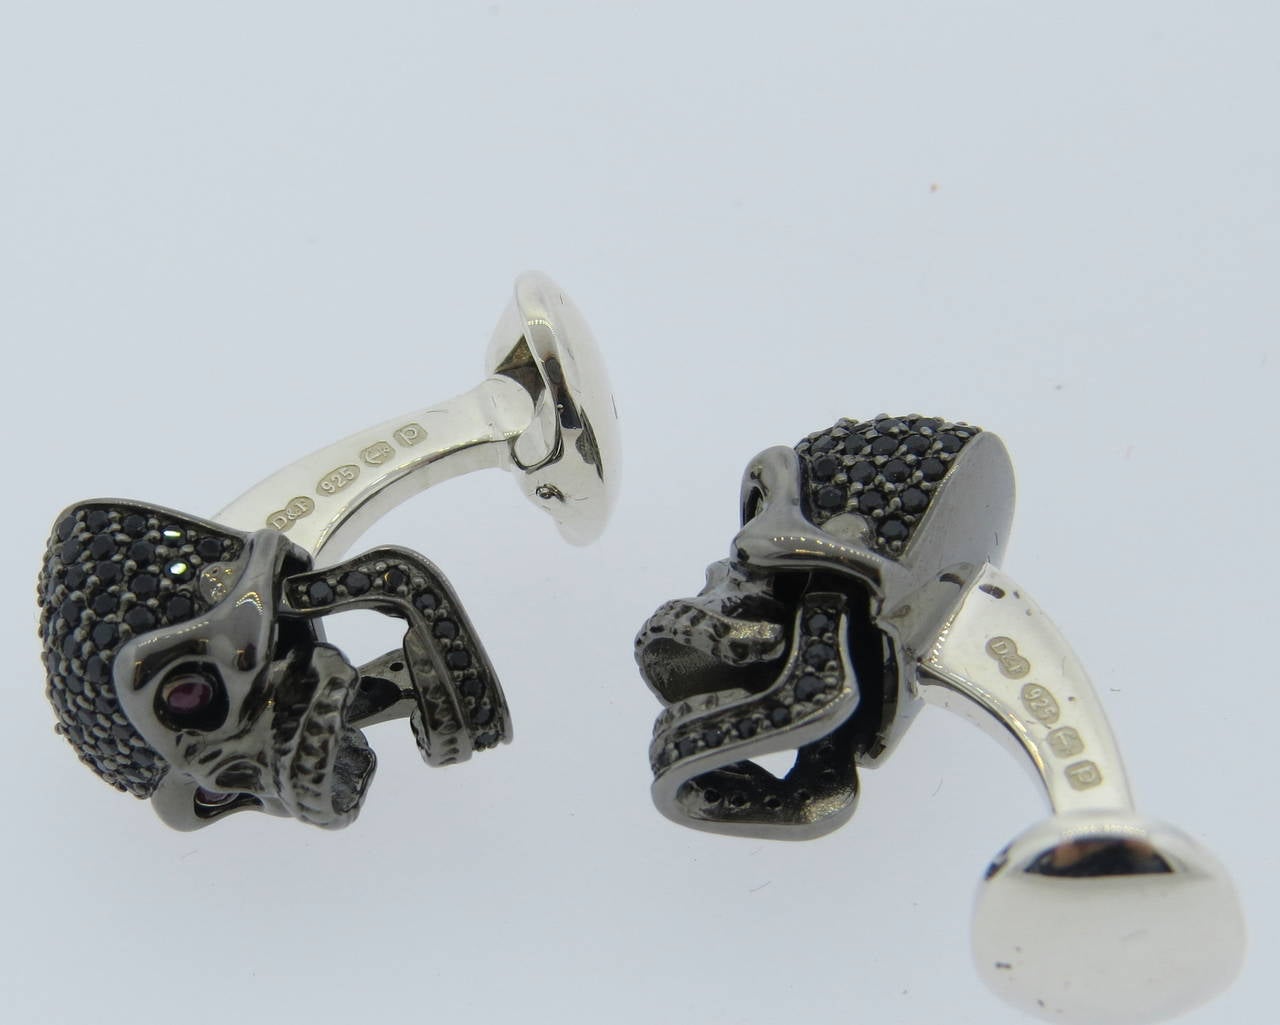 Brand new Deakin & Francis sterling silver skull cufflinks decorated with black spinel and rubies, features moving jaw and eyes. Come with original box and papers. Cufflinks measure 20mm x 12mm, weight - 19.0gr.